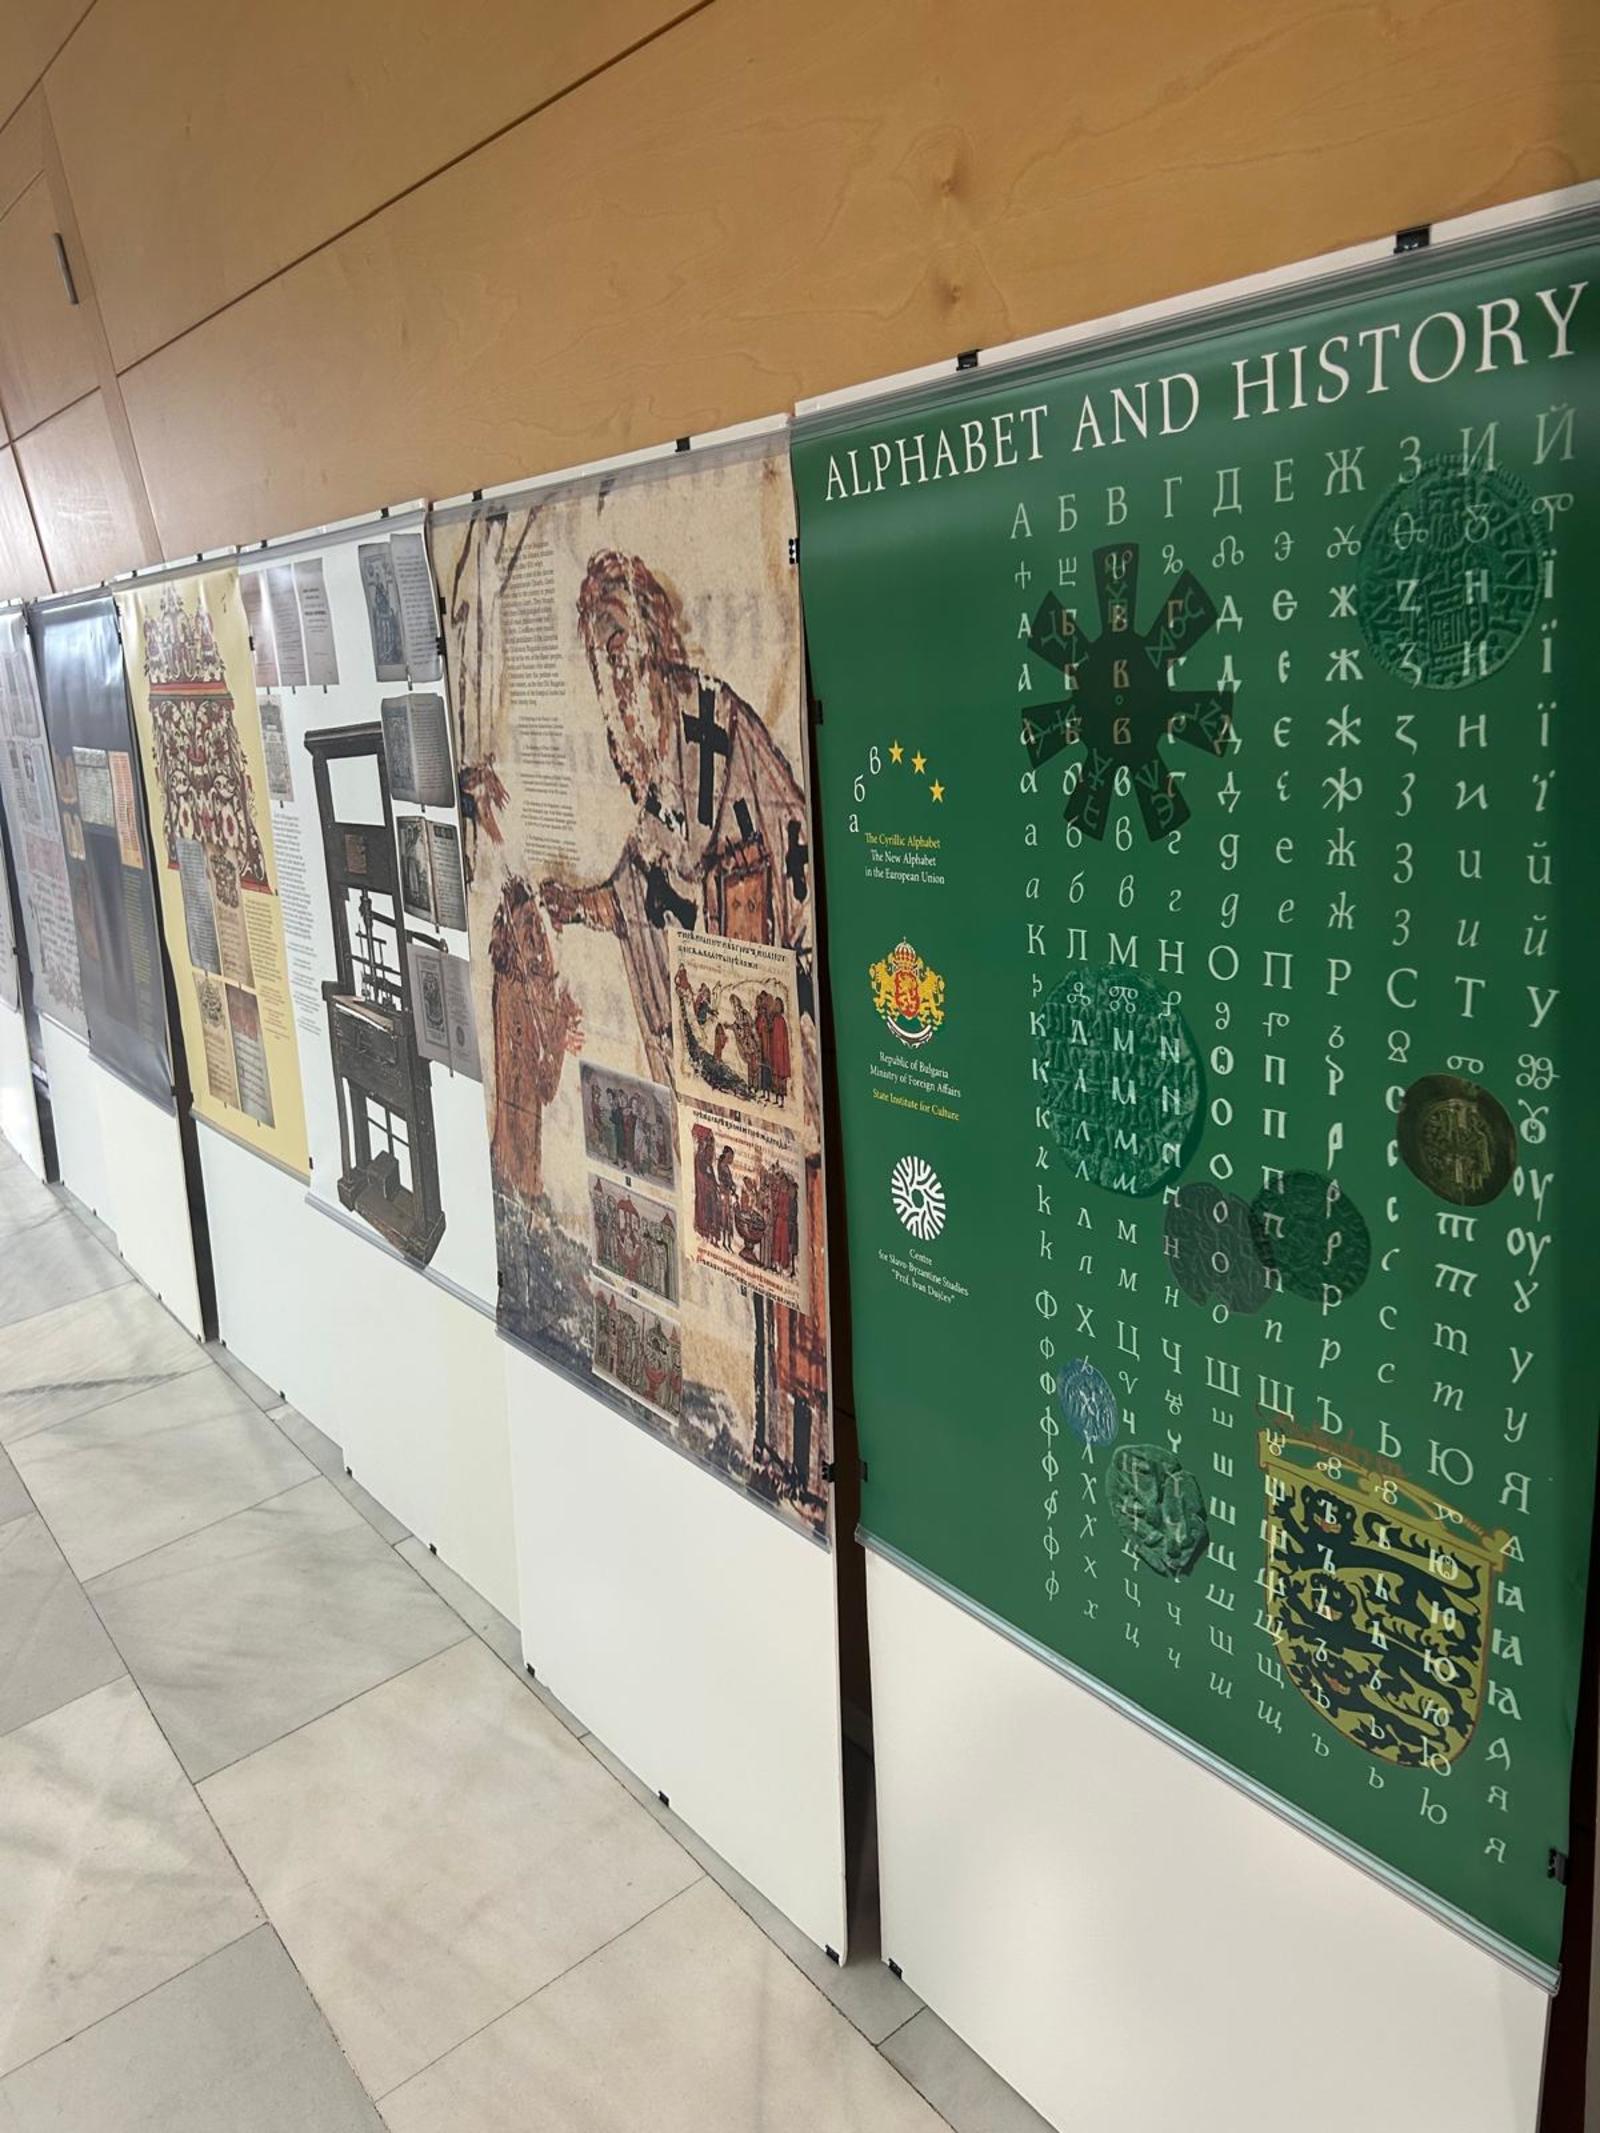 The Exhibition "Alphabet and History" is Visiting Valencia on the Occasion of the May 24 holiday